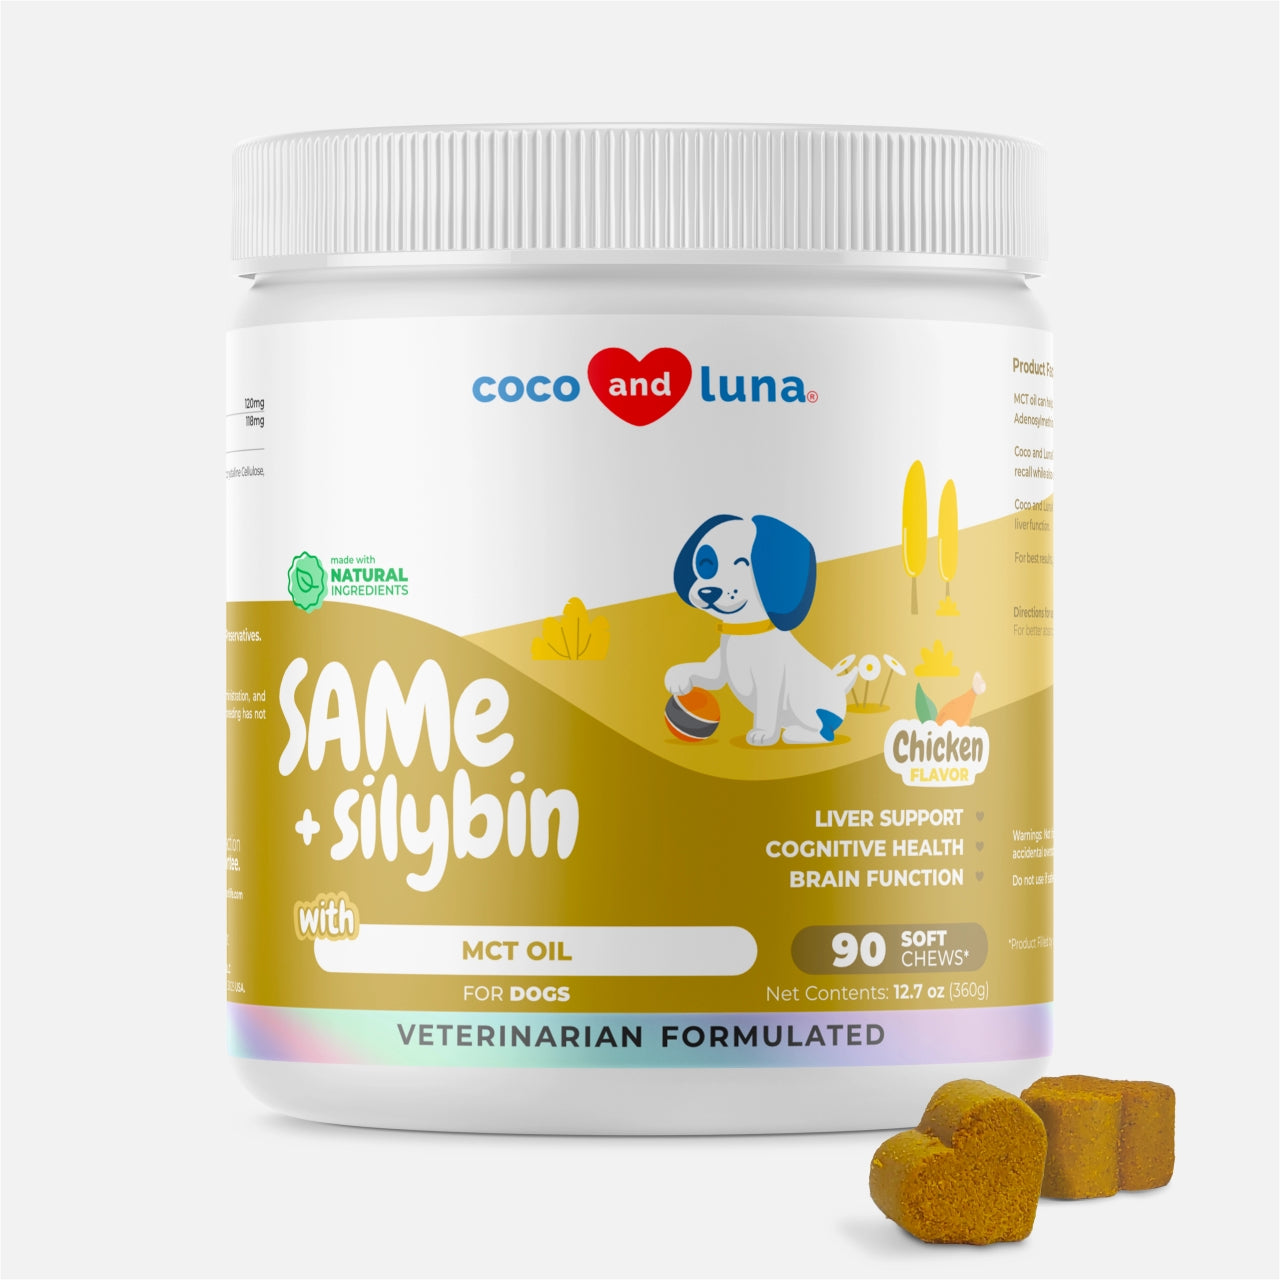 SAMe and Silybin for Dogs - 90 Soft Chews - Coco and Luna